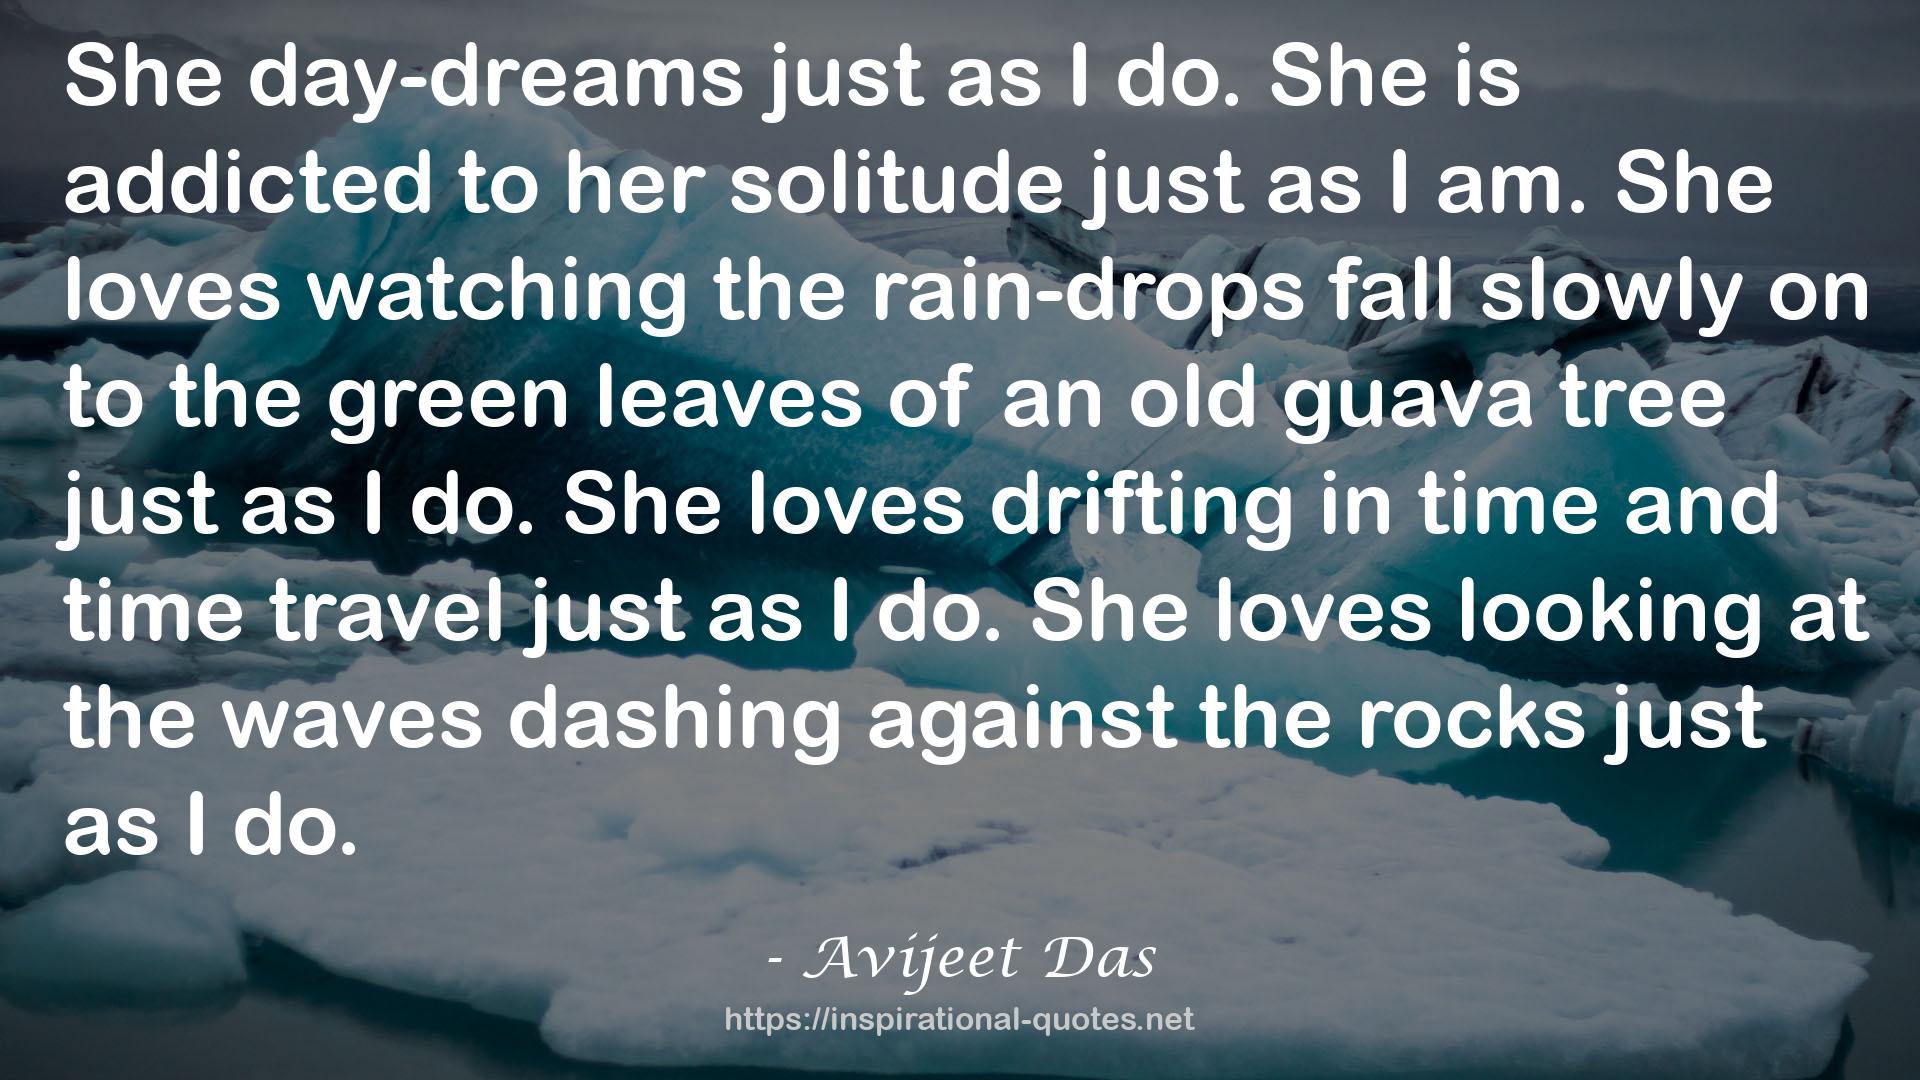 her solitude  QUOTES